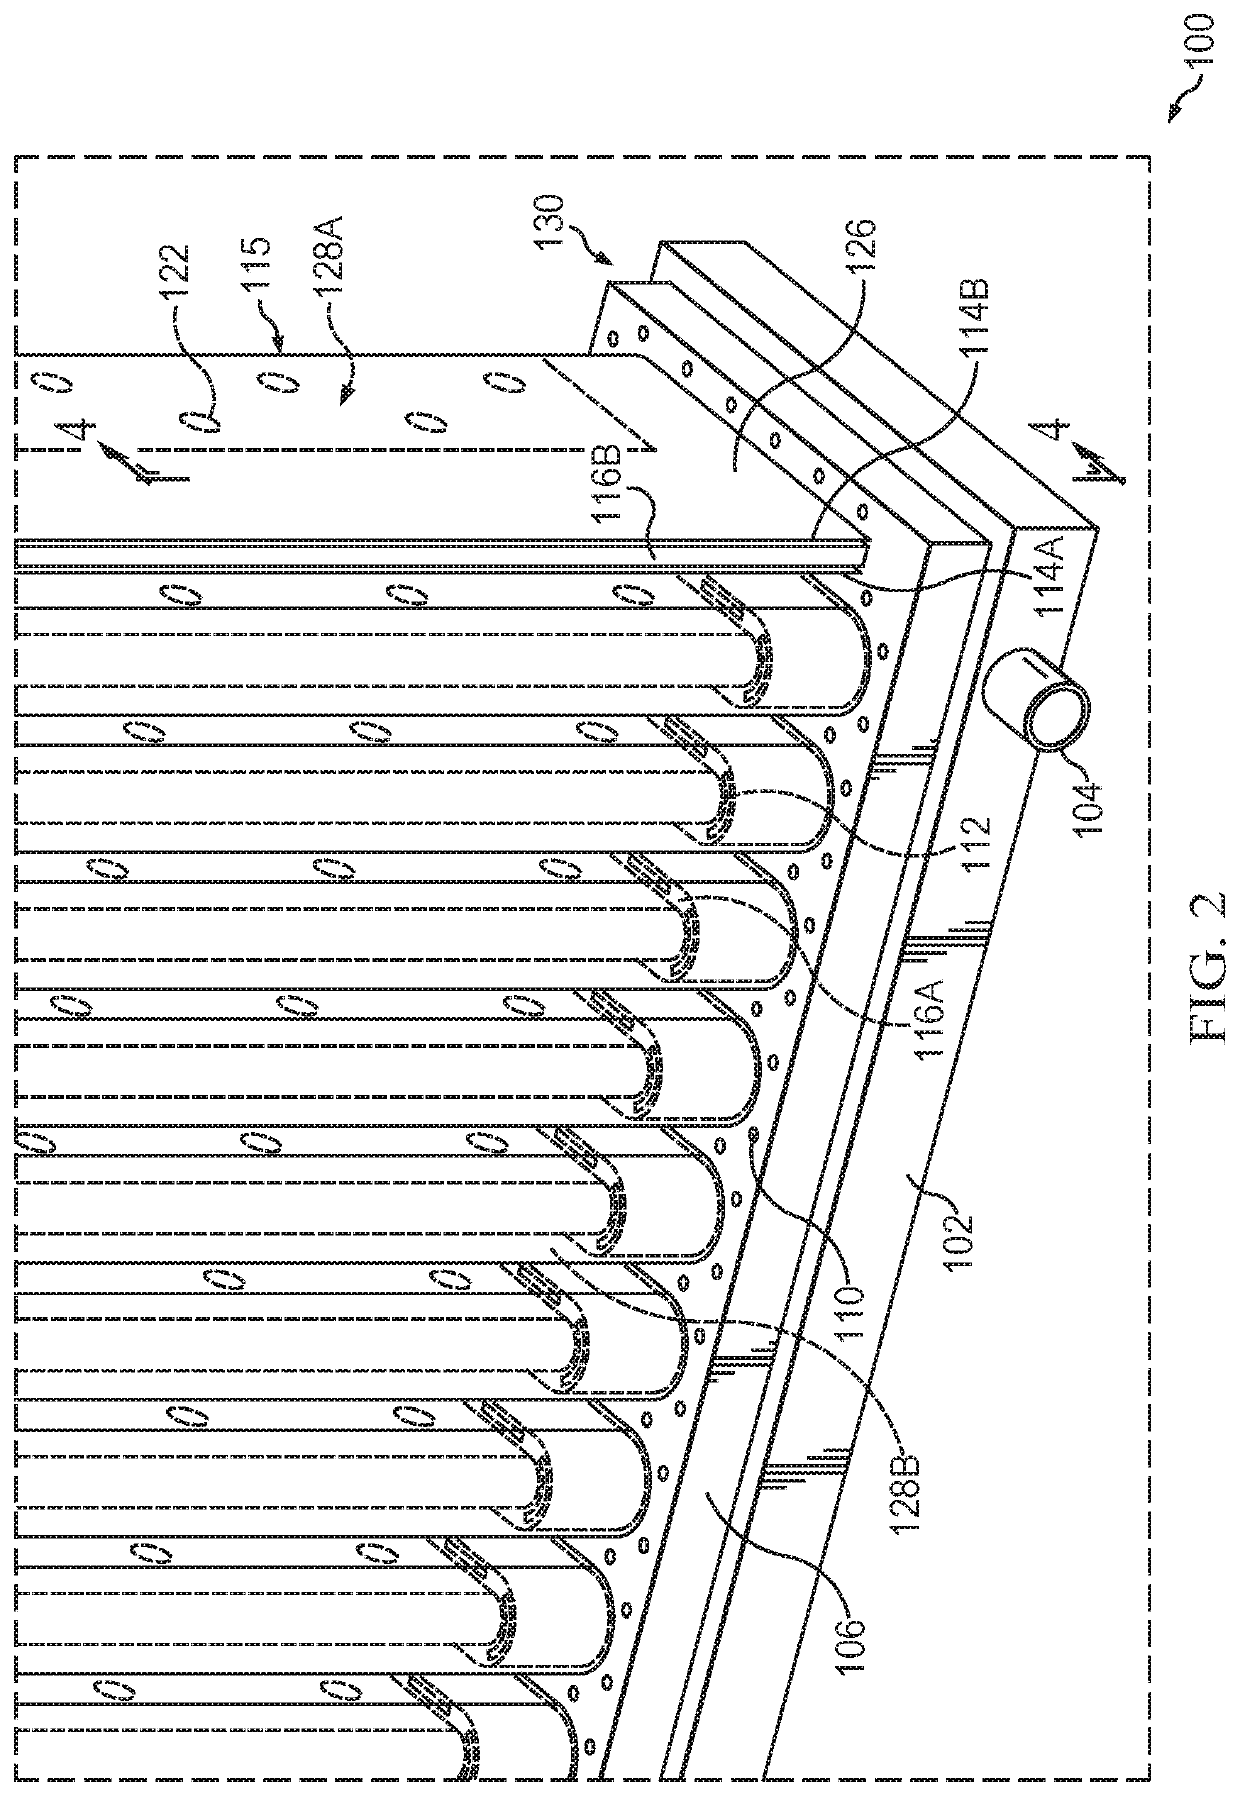 Compact high-throughput device for water treatment